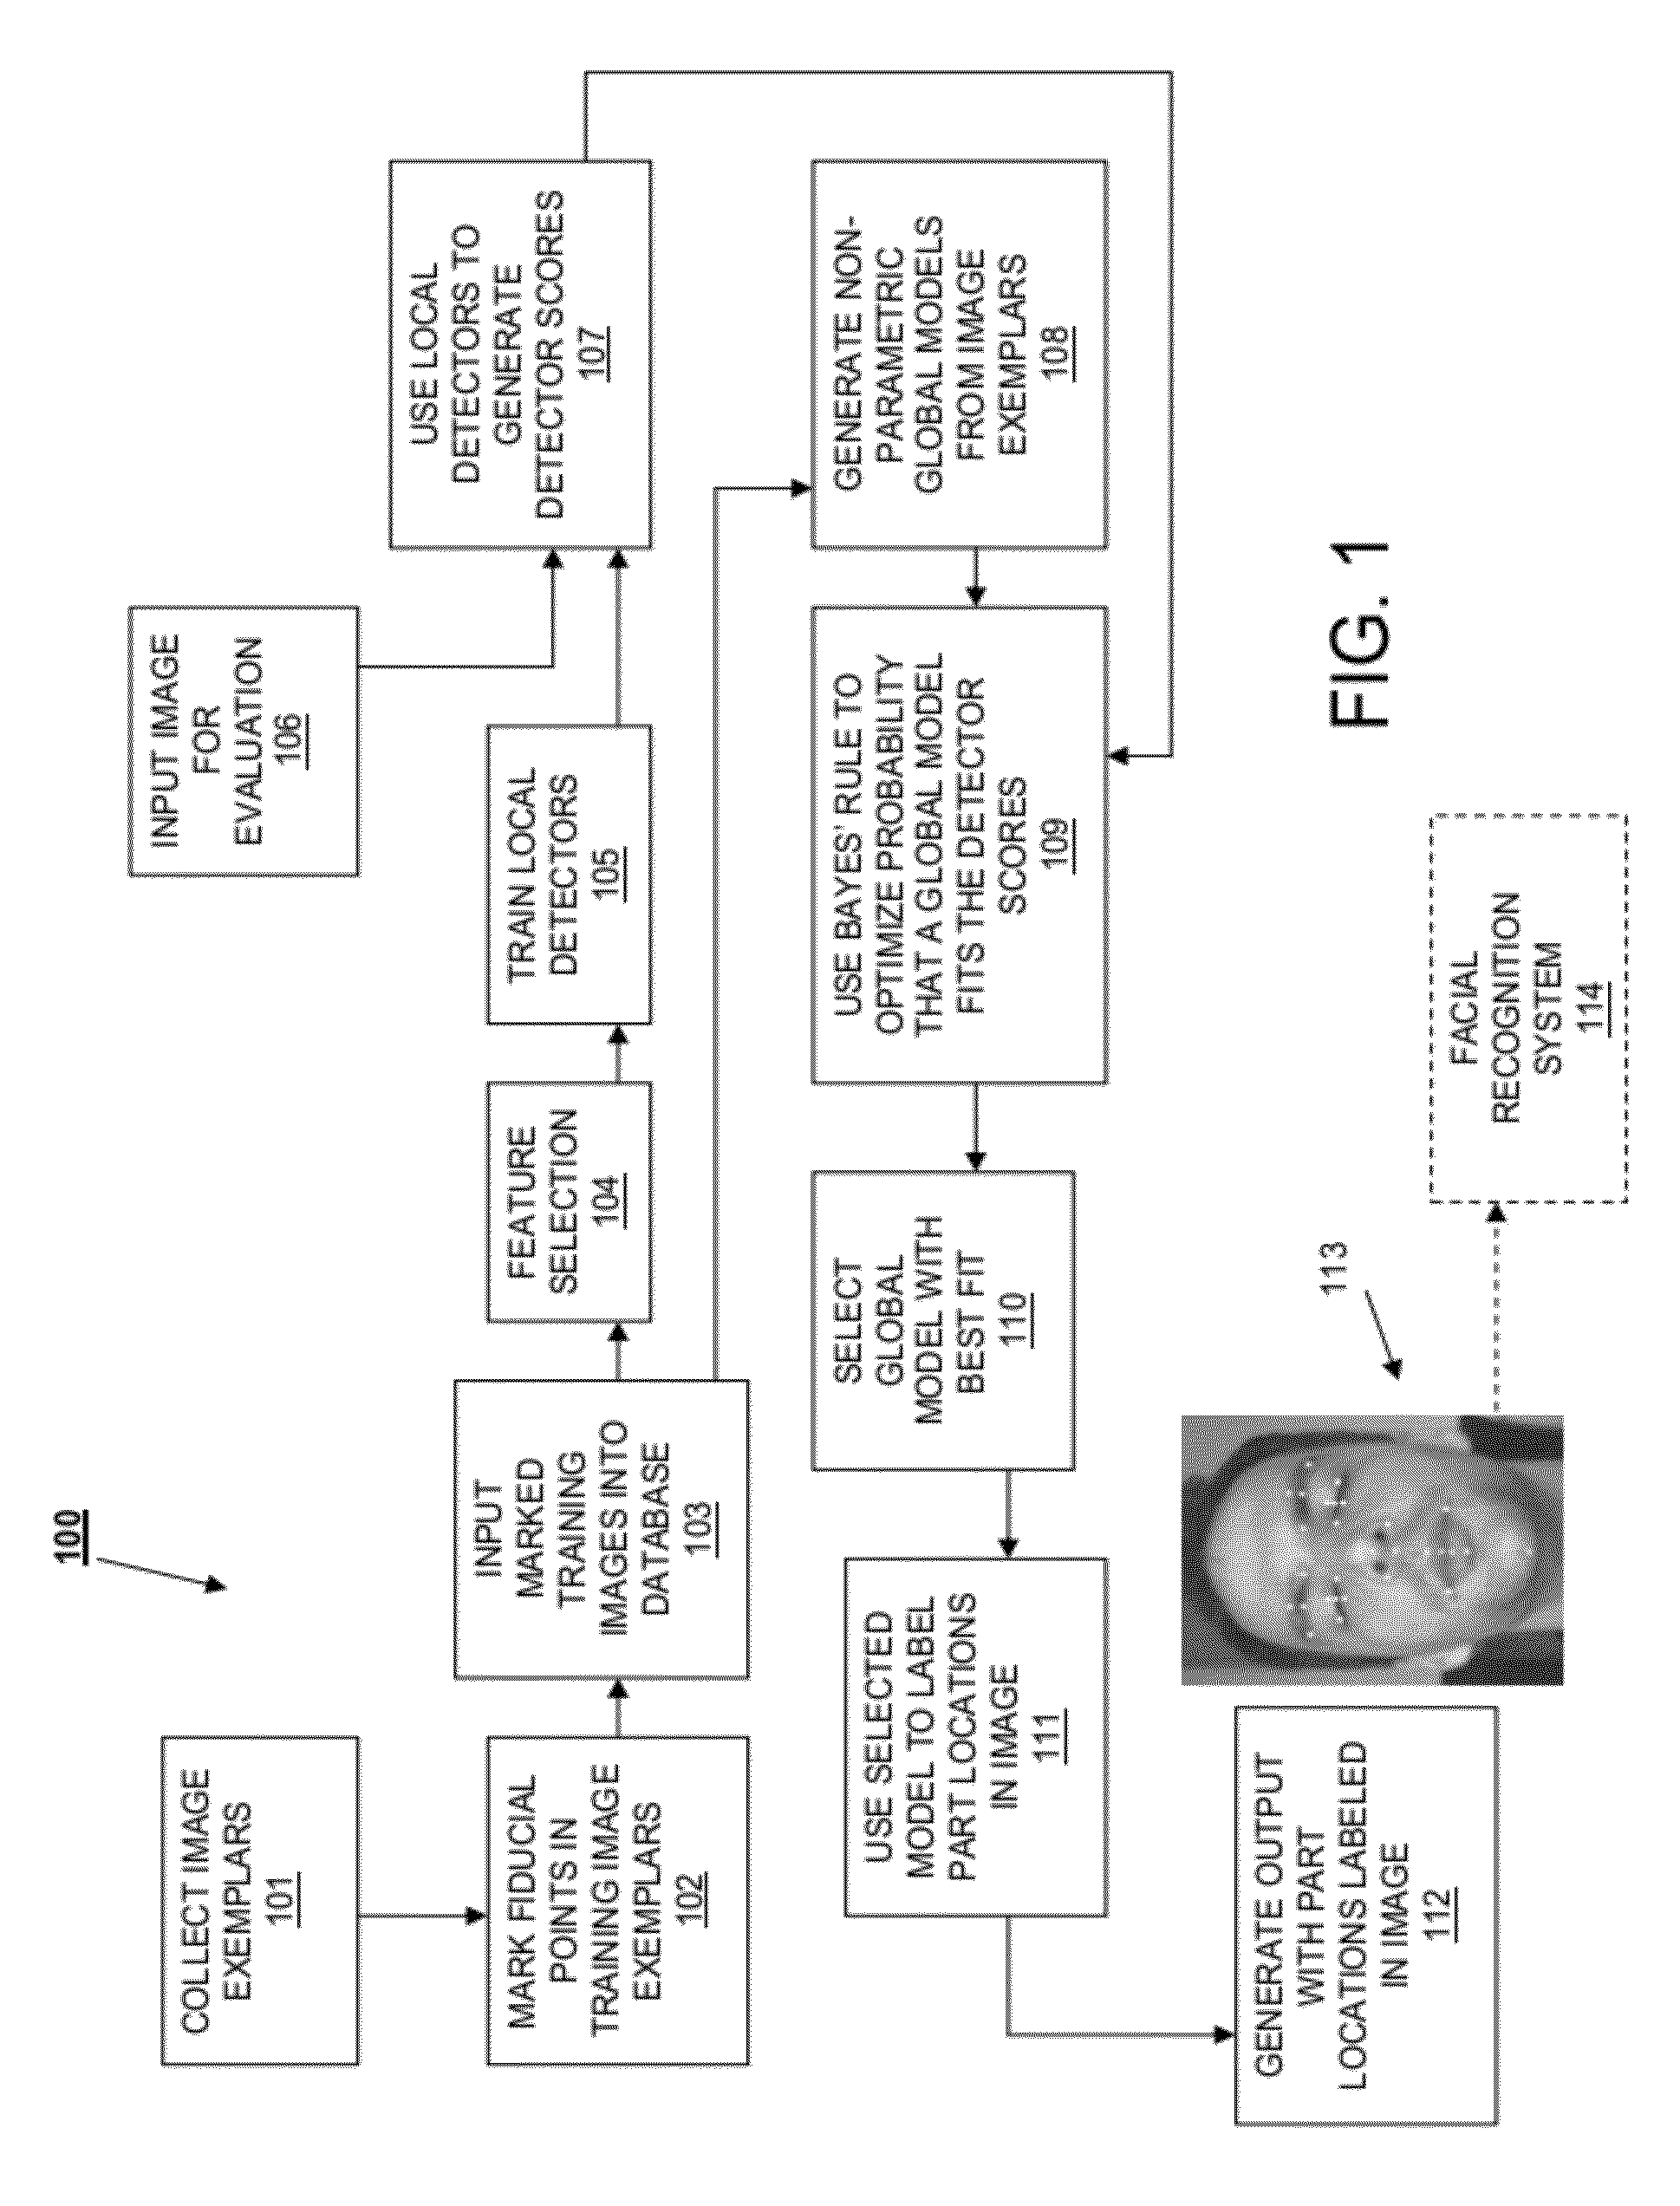 Method and System For Localizing Parts of an Object in an Image For Computer Vision Applications